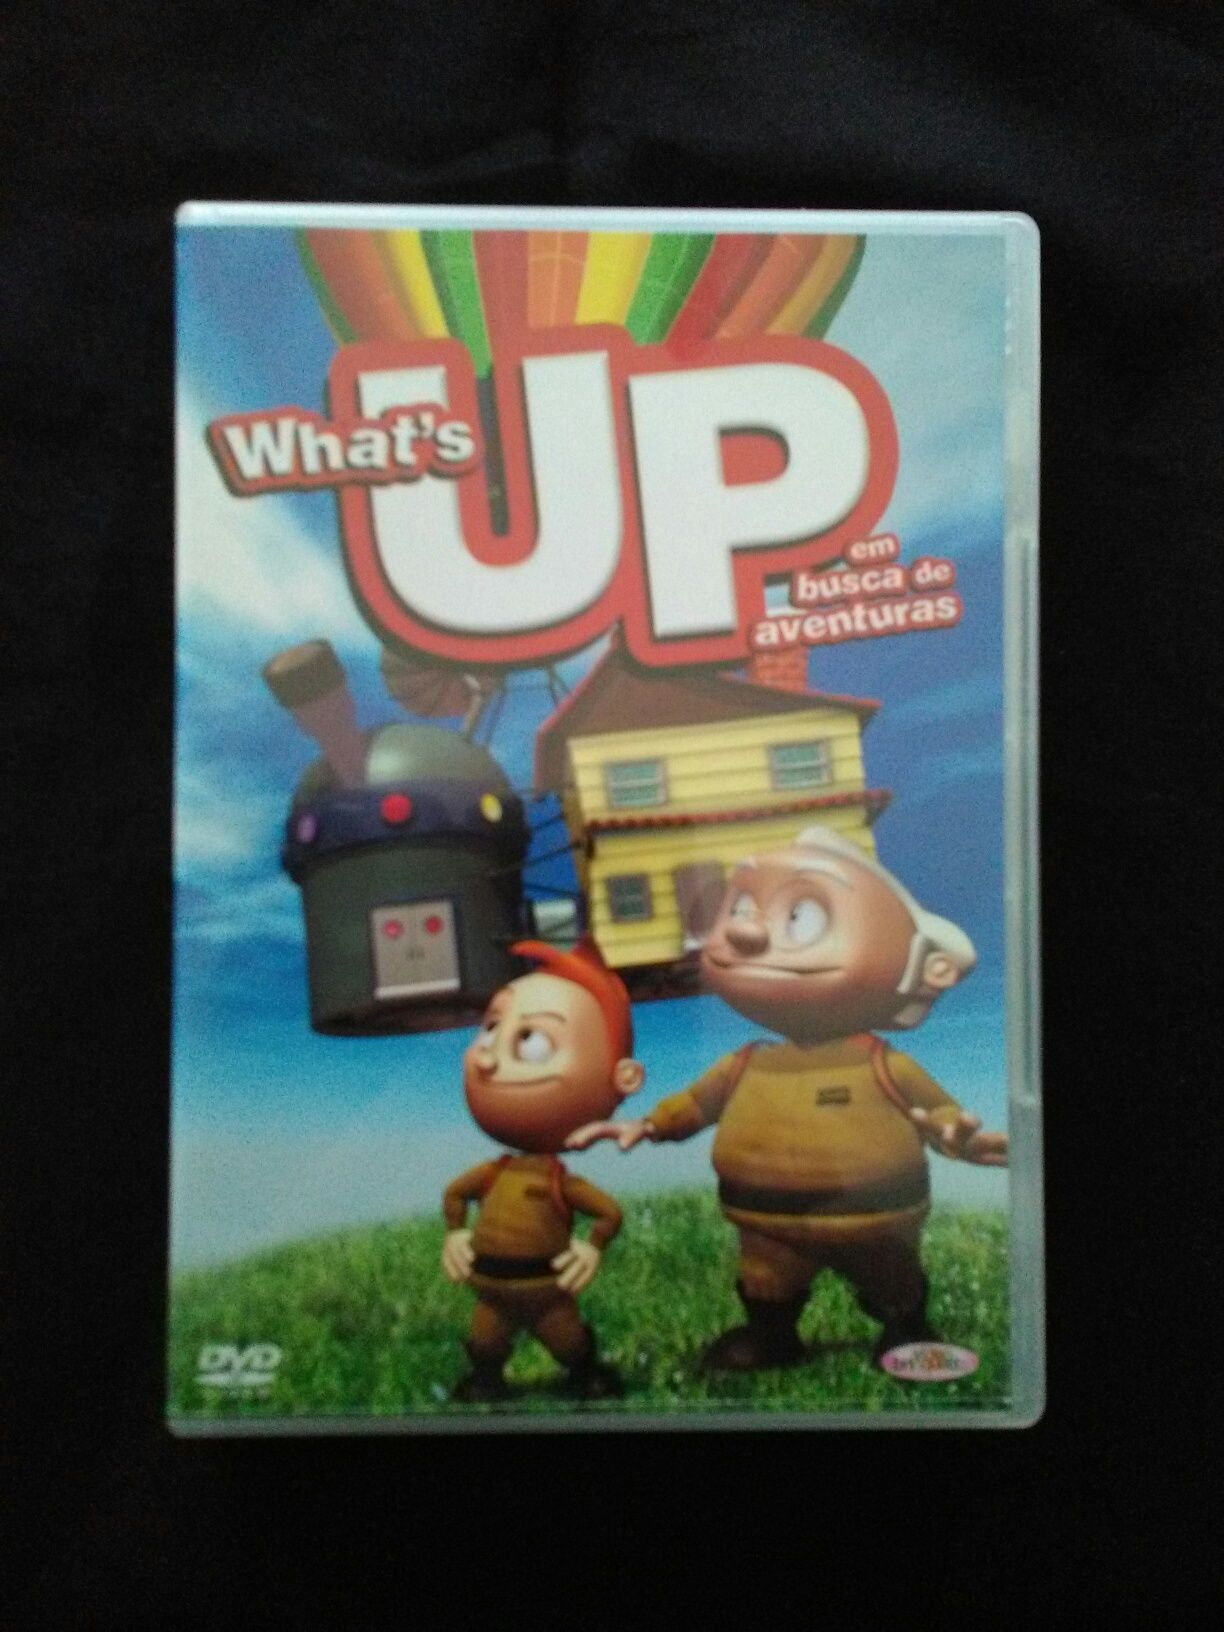 Whats Up filme 1€